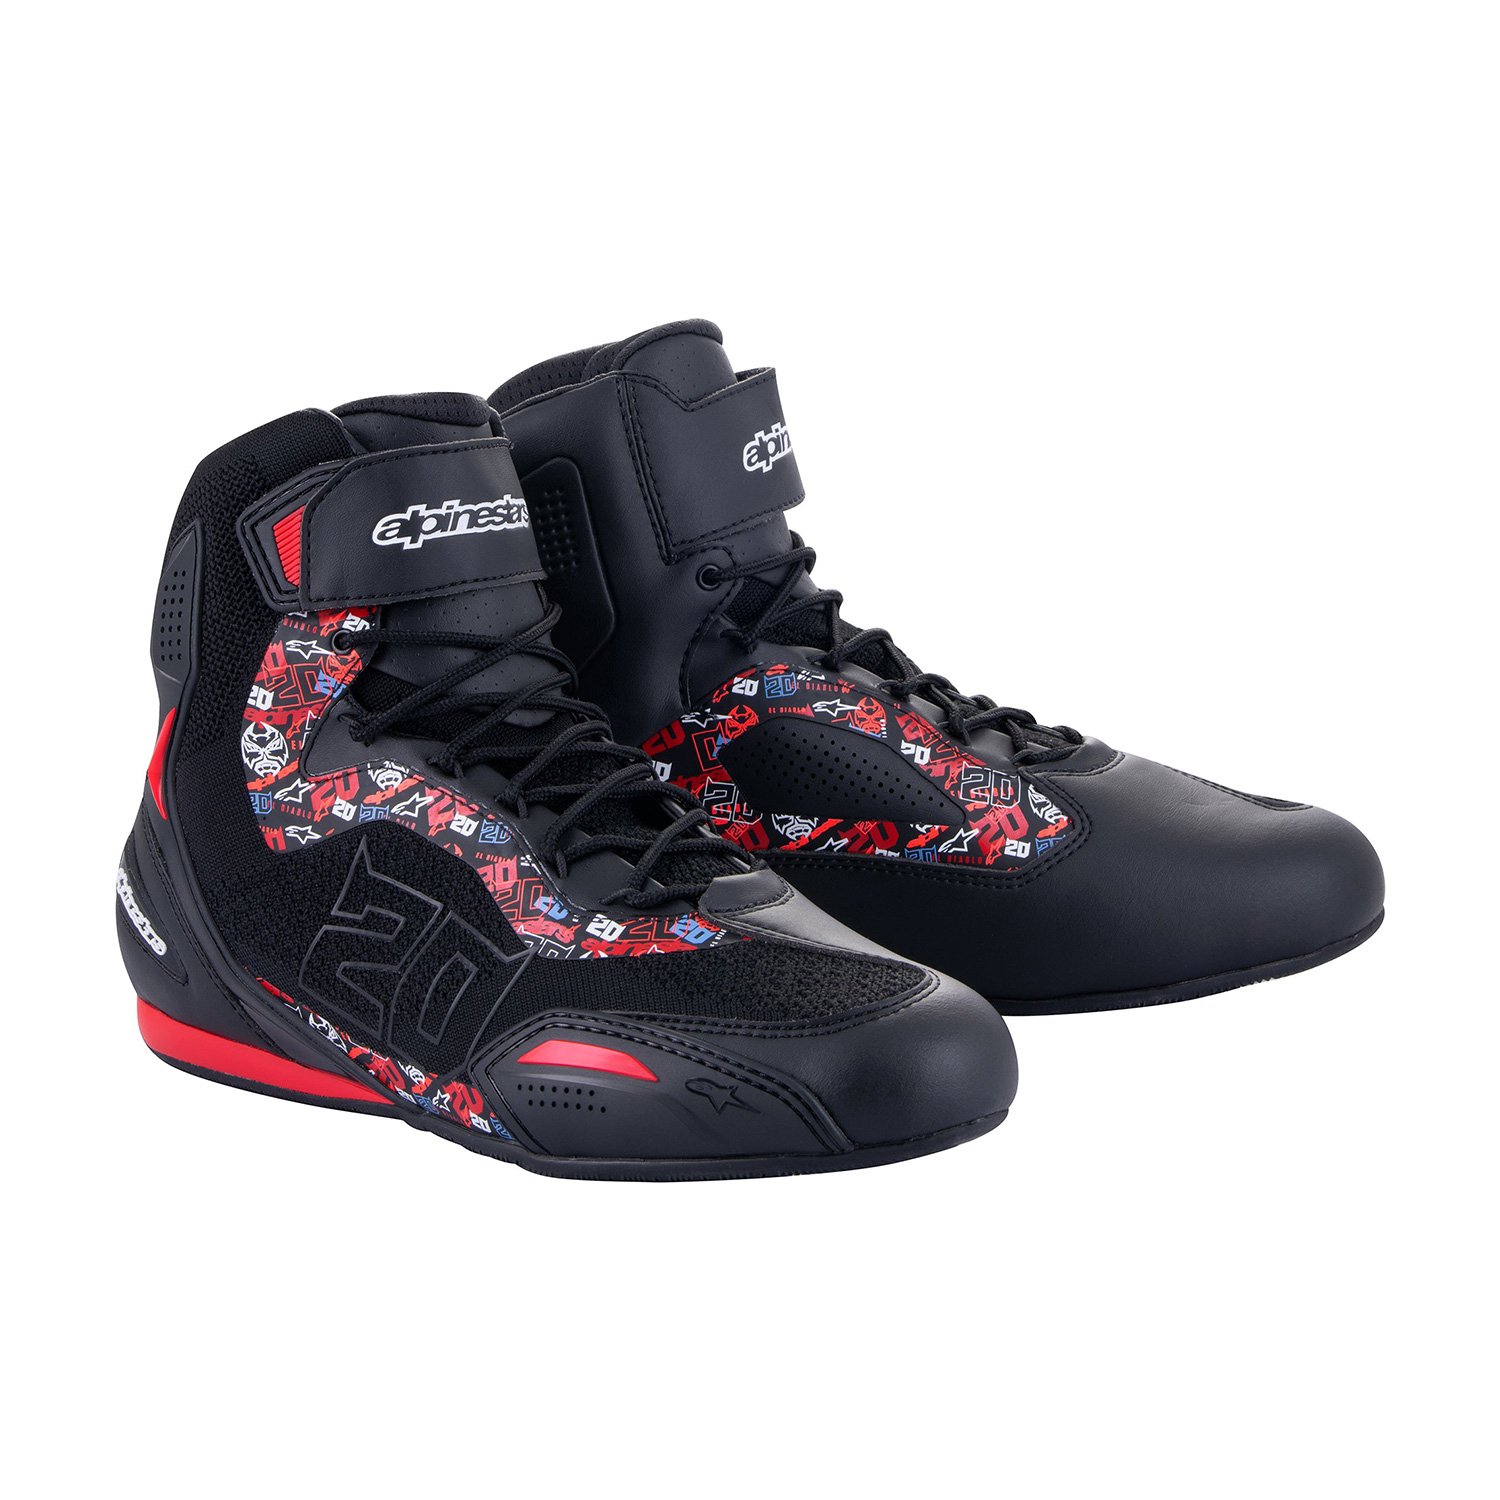 Image of EU Alpinestars FQ20 Faster-3 Rideknit Noir Bright Rouge Chaussures Taille US 65